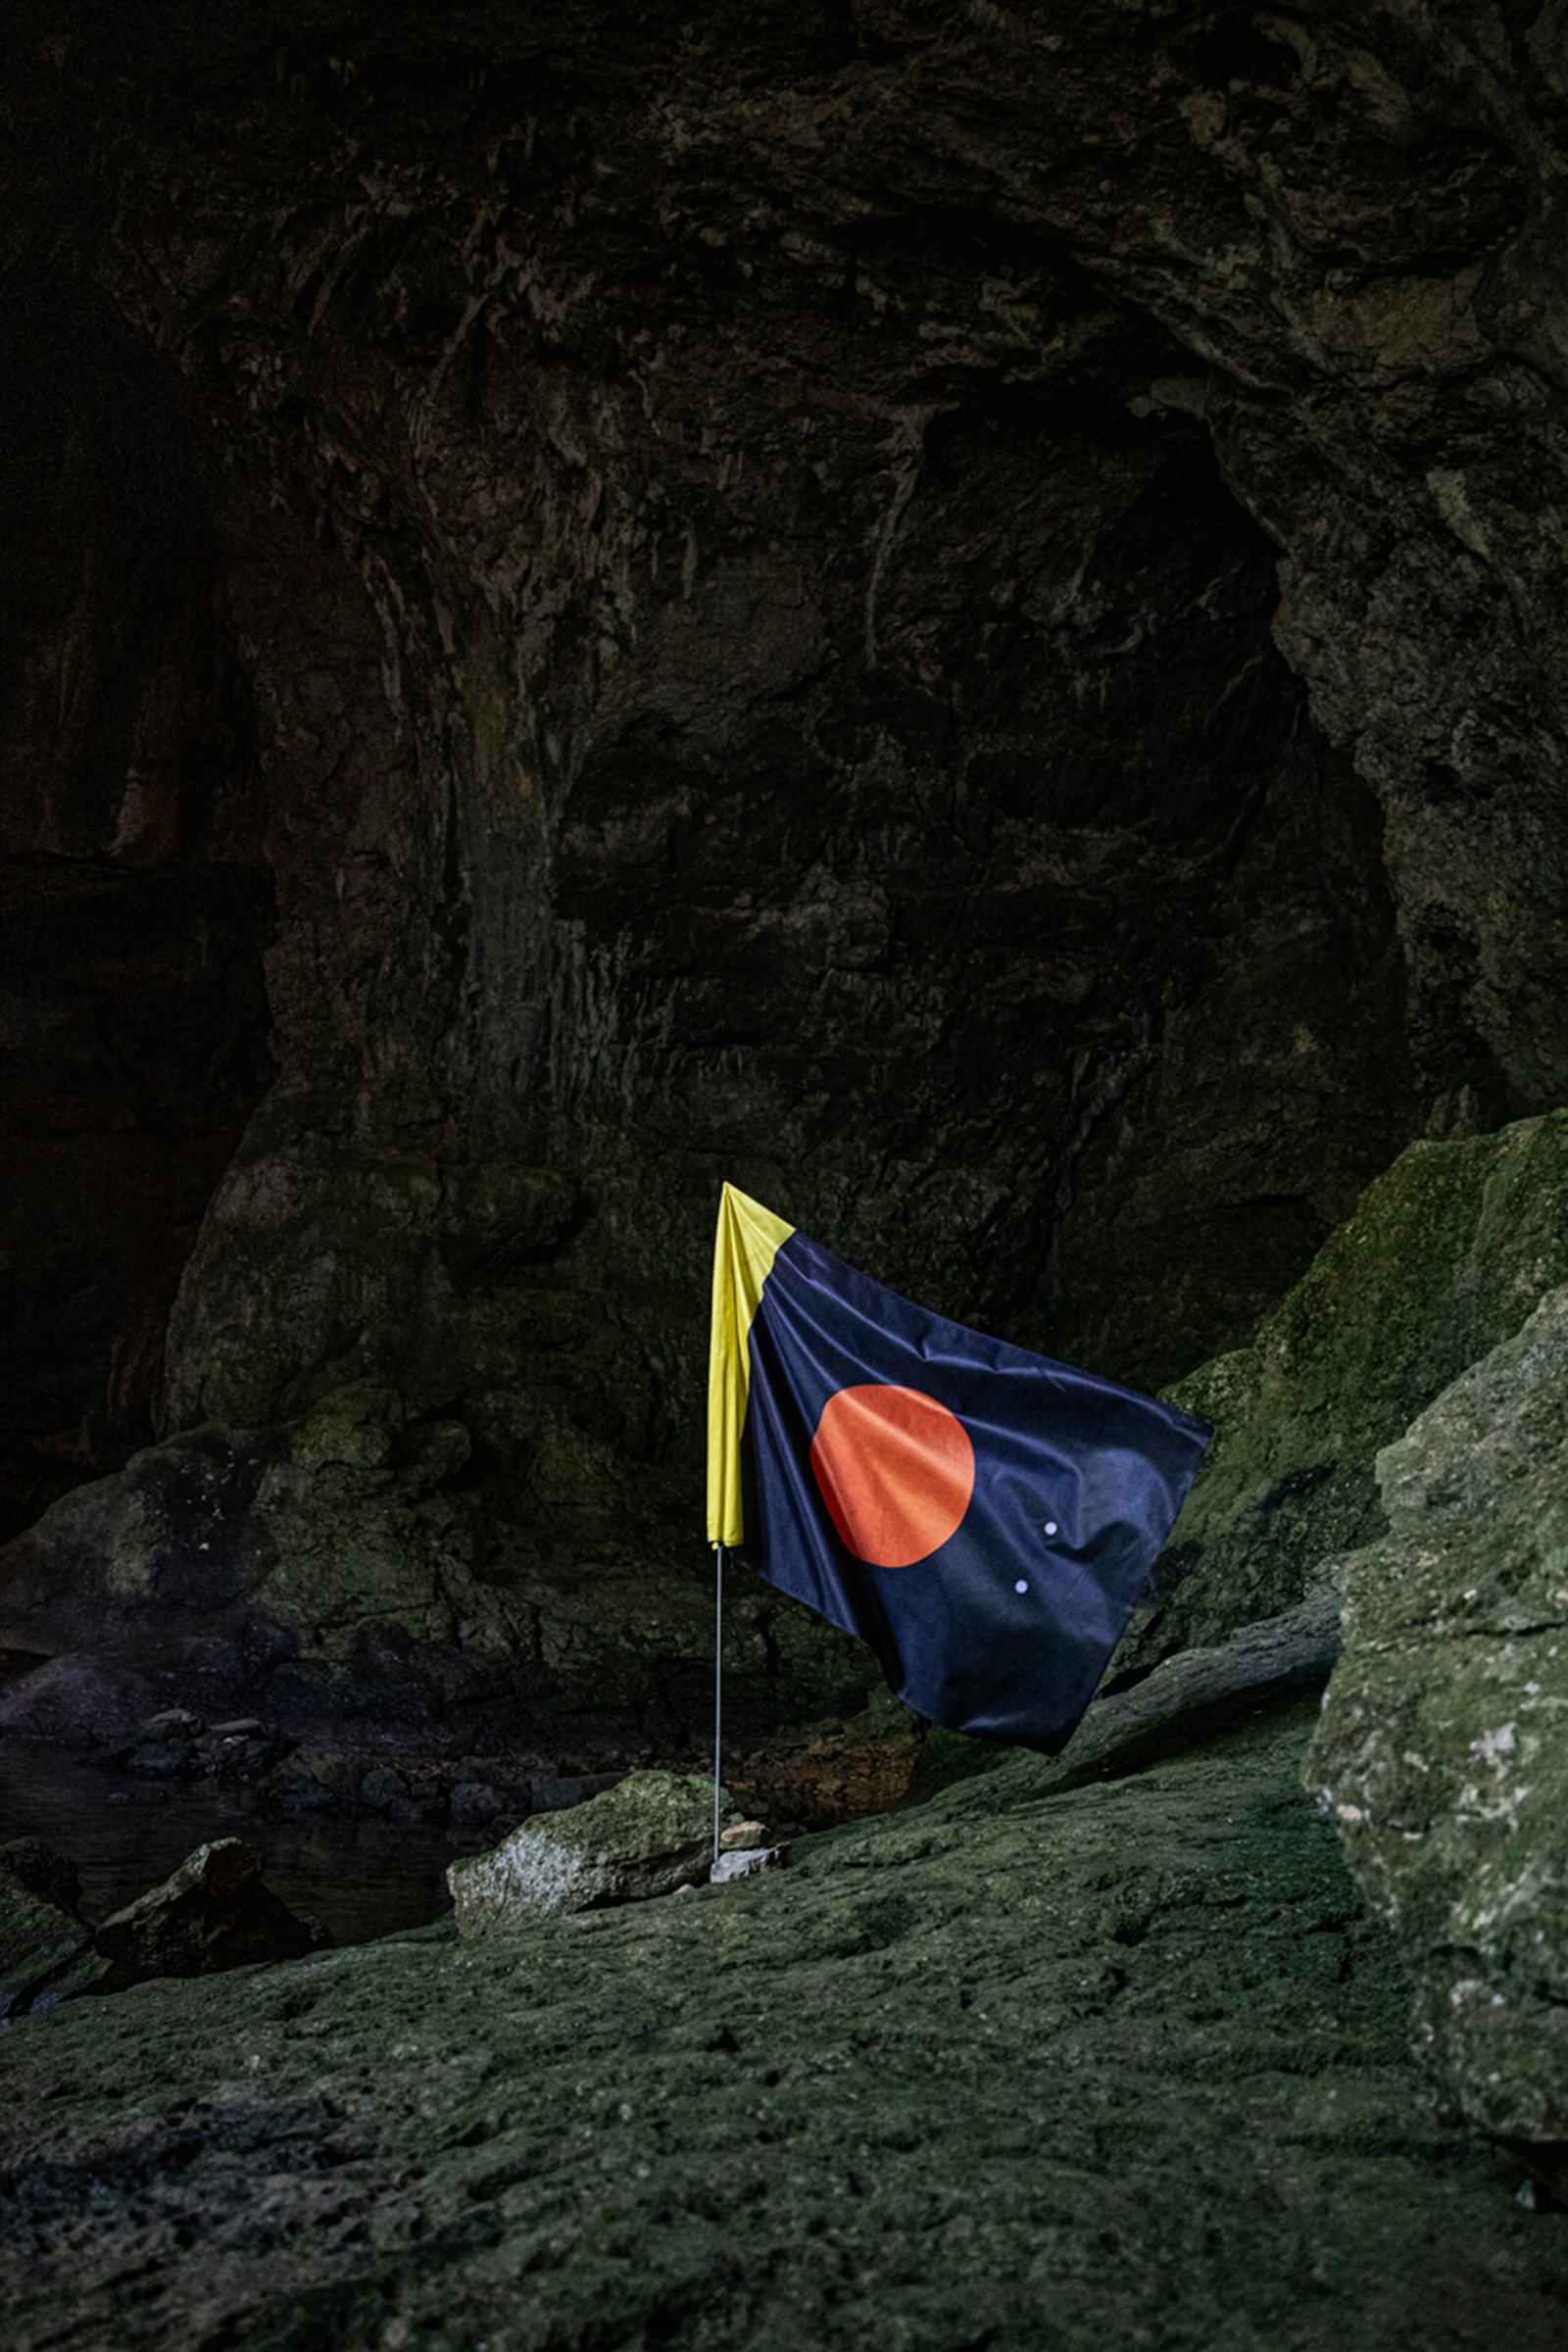  Mars flag made by a Slovenian designer Miha Artnak planted in the cave system simulating the Mars lava tubes. The underground tunnels left behind the running lava could be one of the most suitable living habitats on Mars since they would provide a g